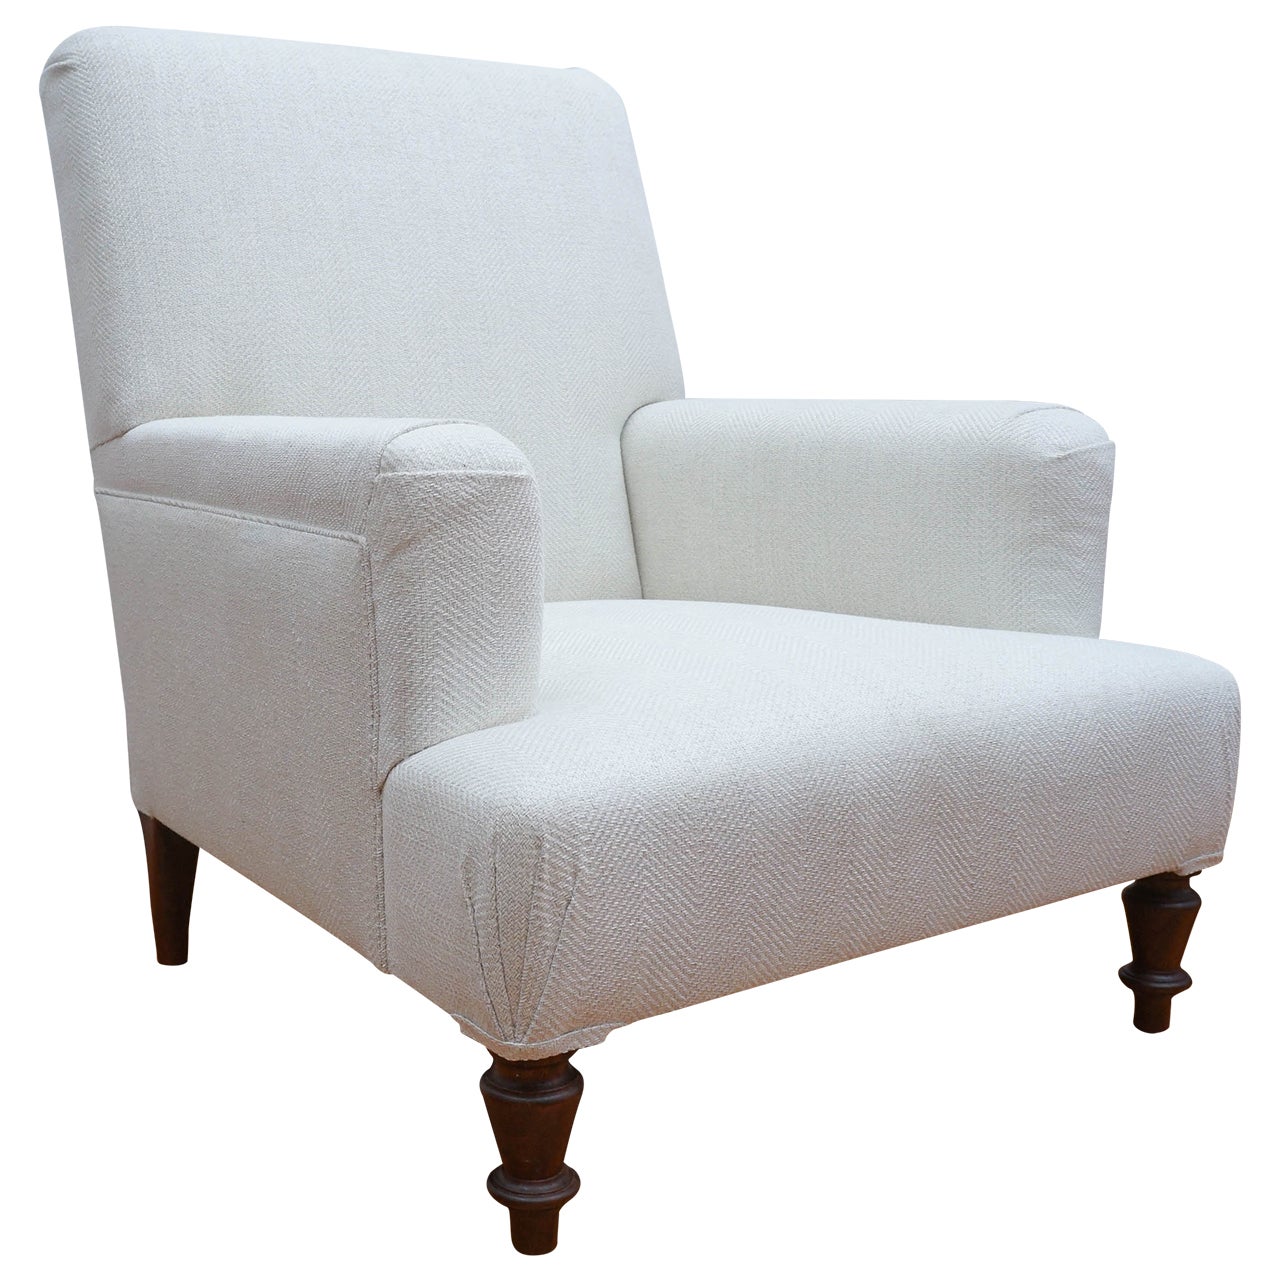 Custom "Provence" Upholstered Club Chair For Sale